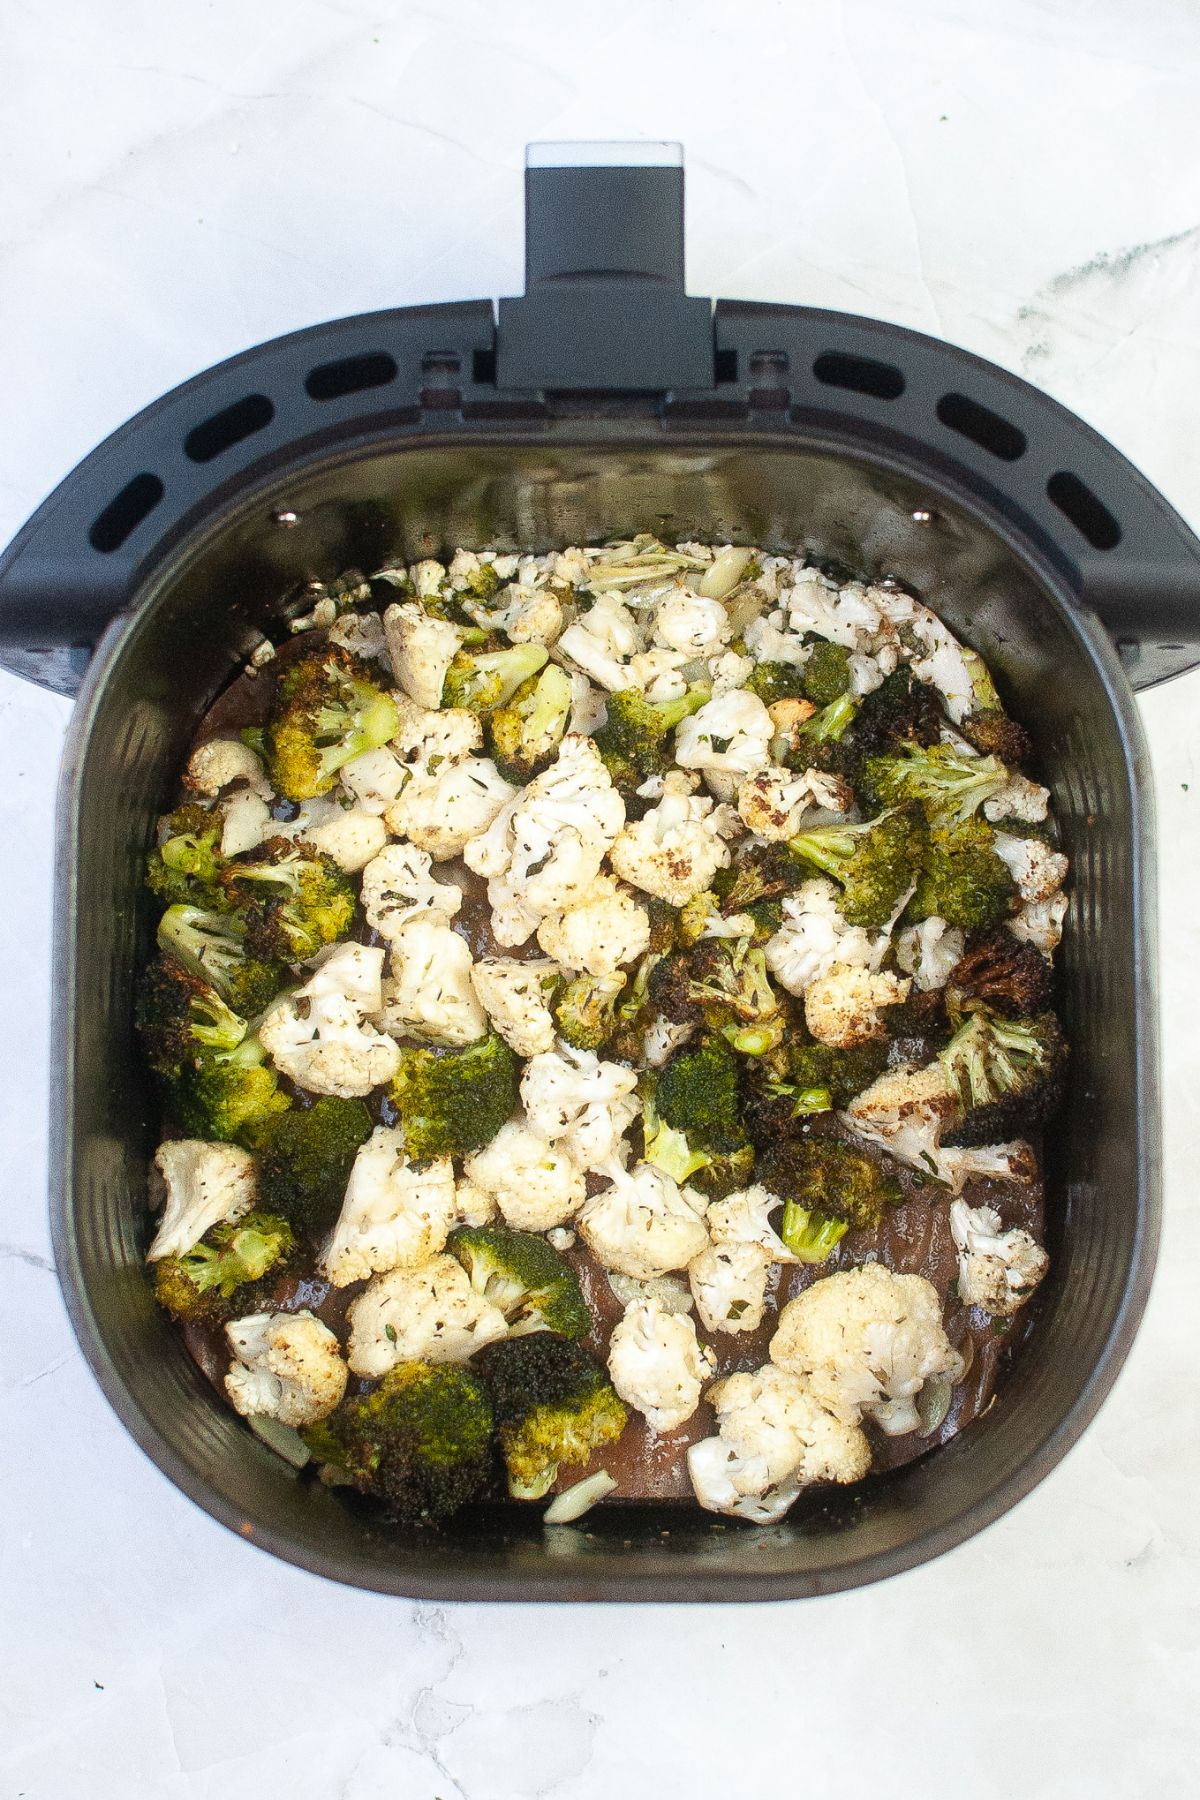 broccoli and cauliflower being cooked in an air fryer basket.